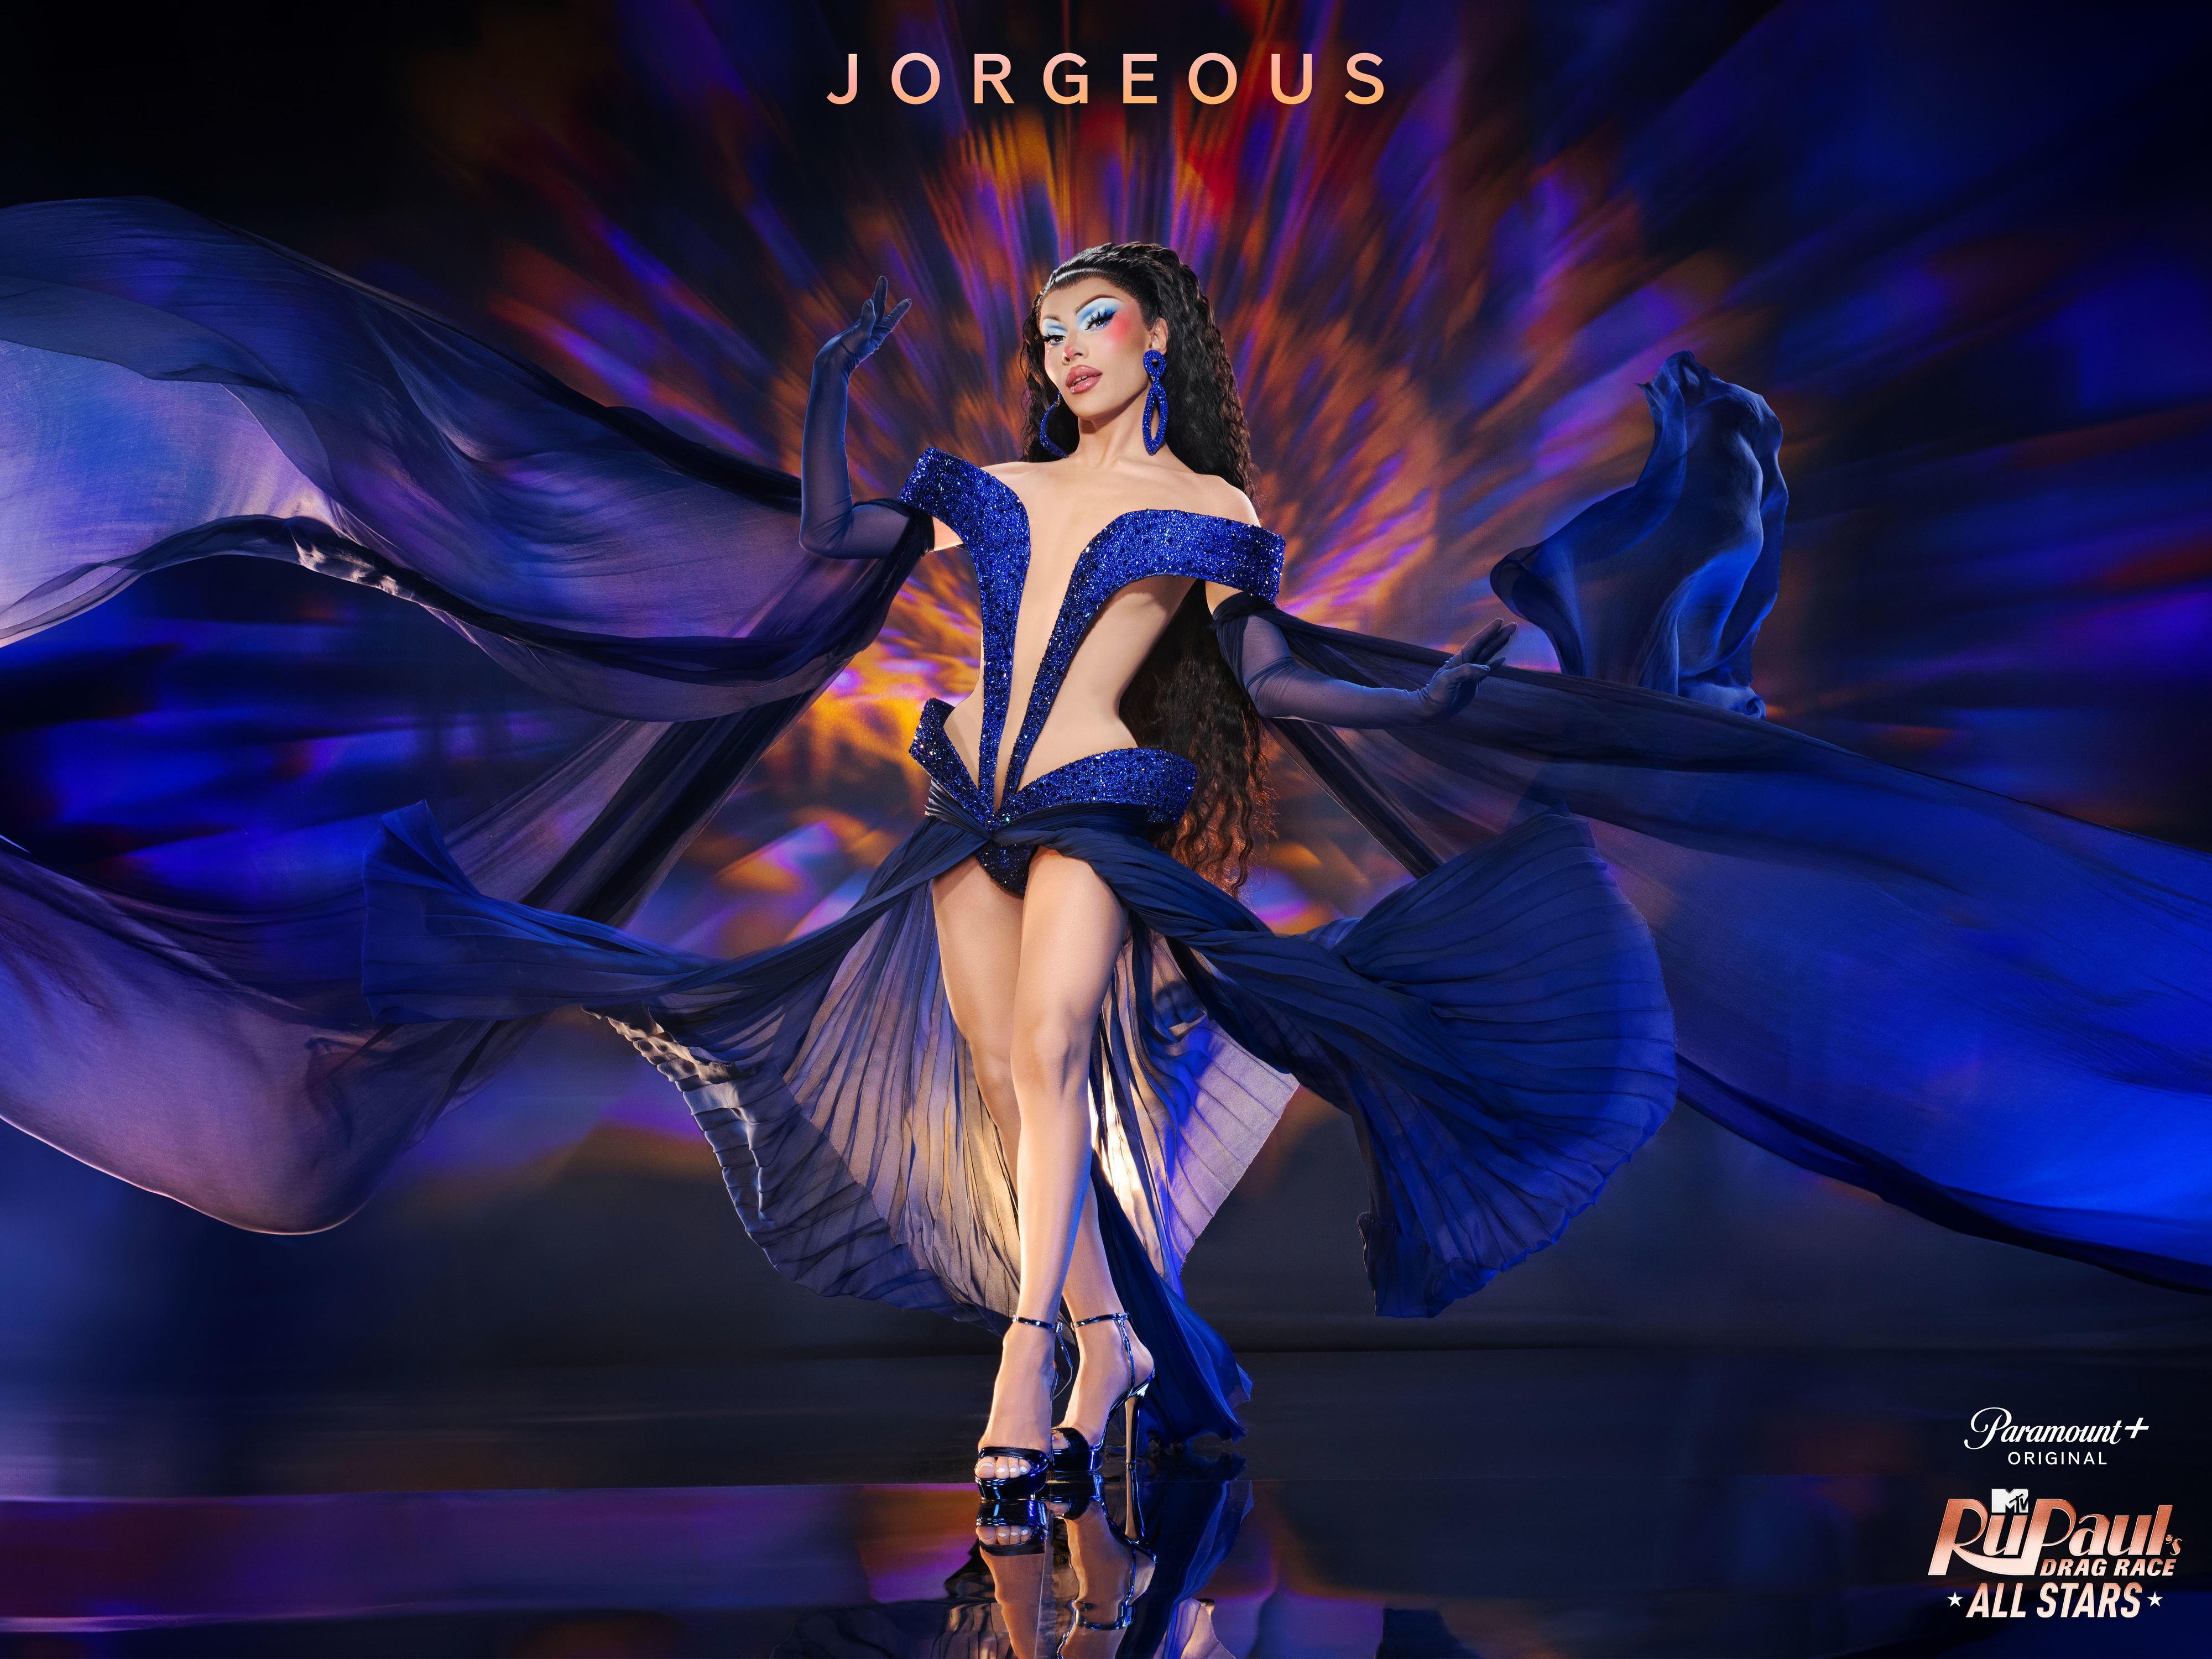 Jorgeous in an elaborate blue costume with expansive flowing fabric